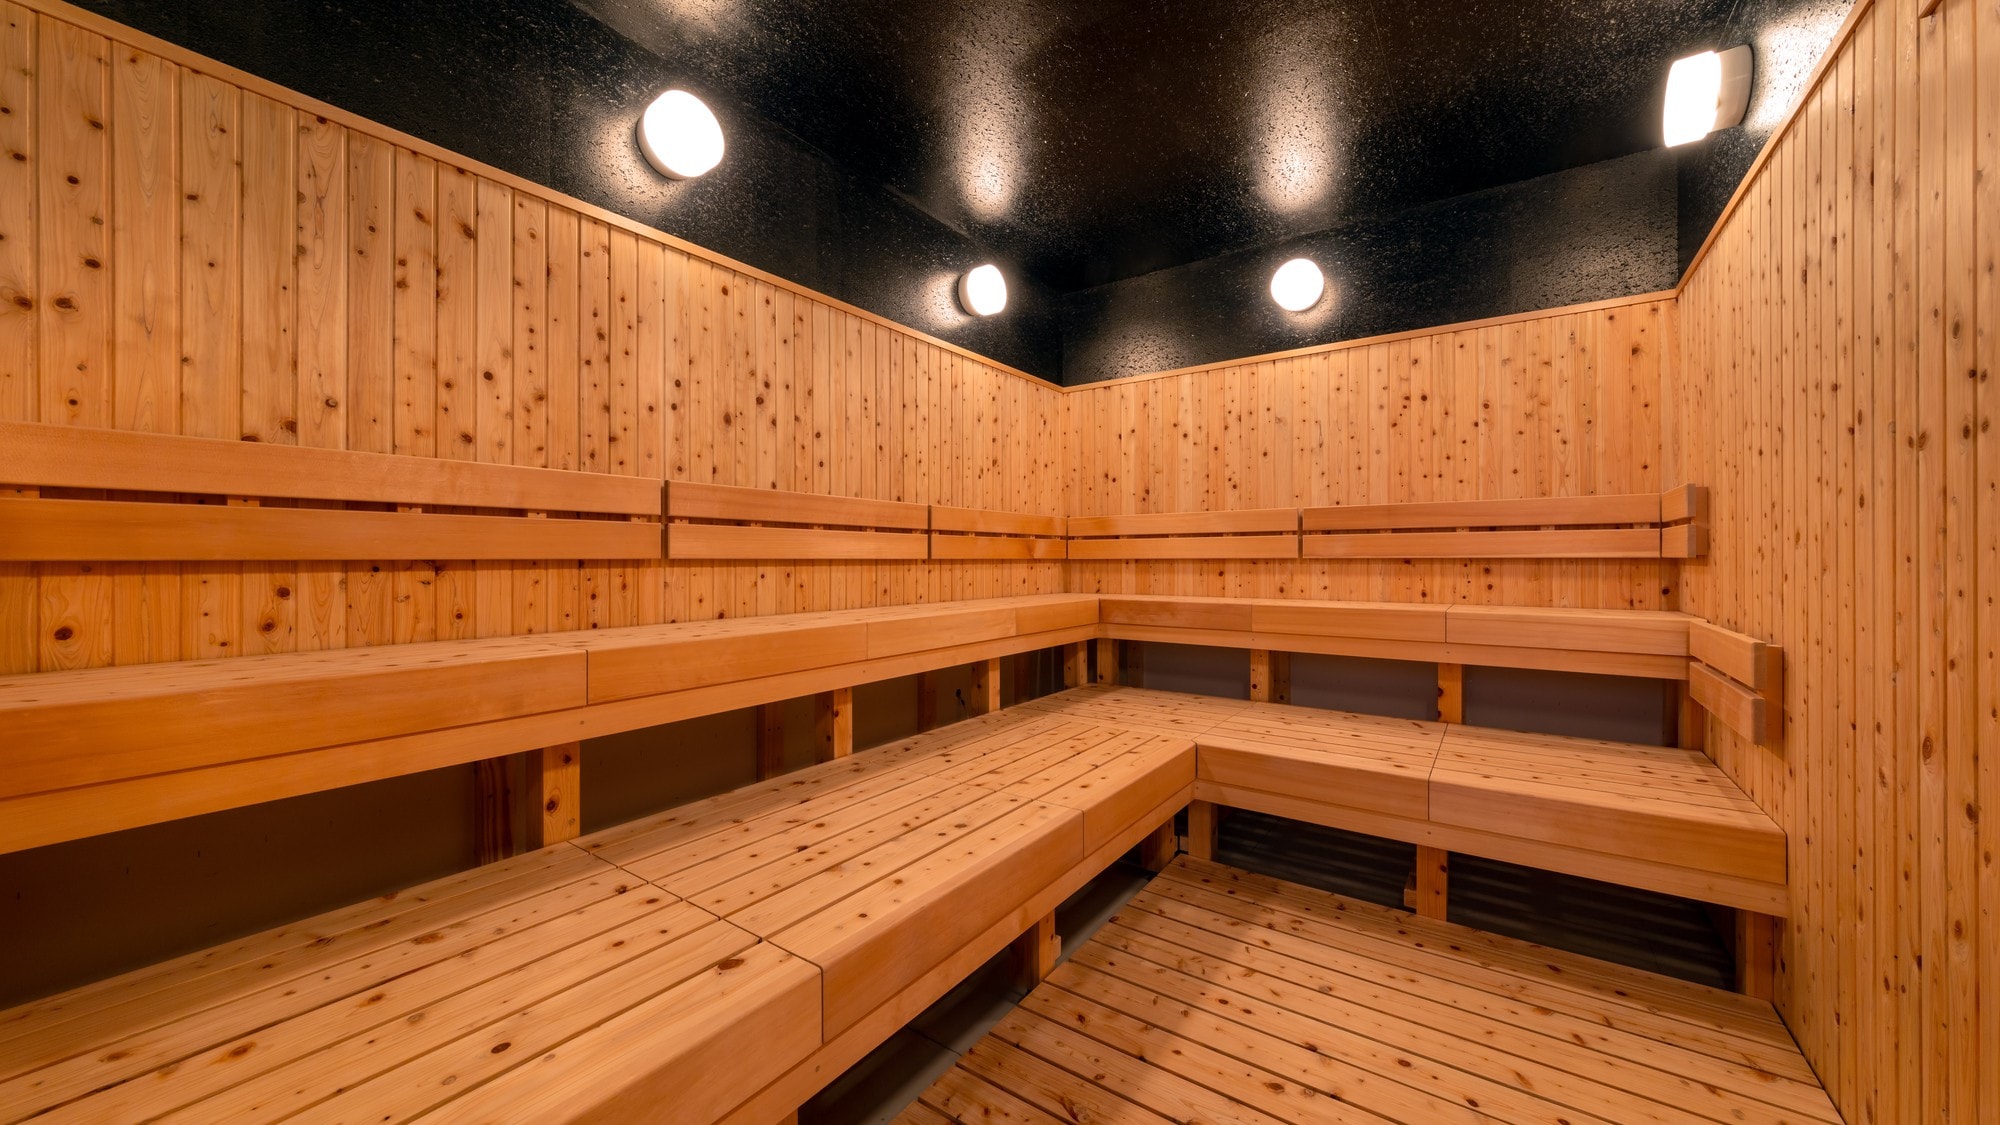 Equipped with sauna for both men and women